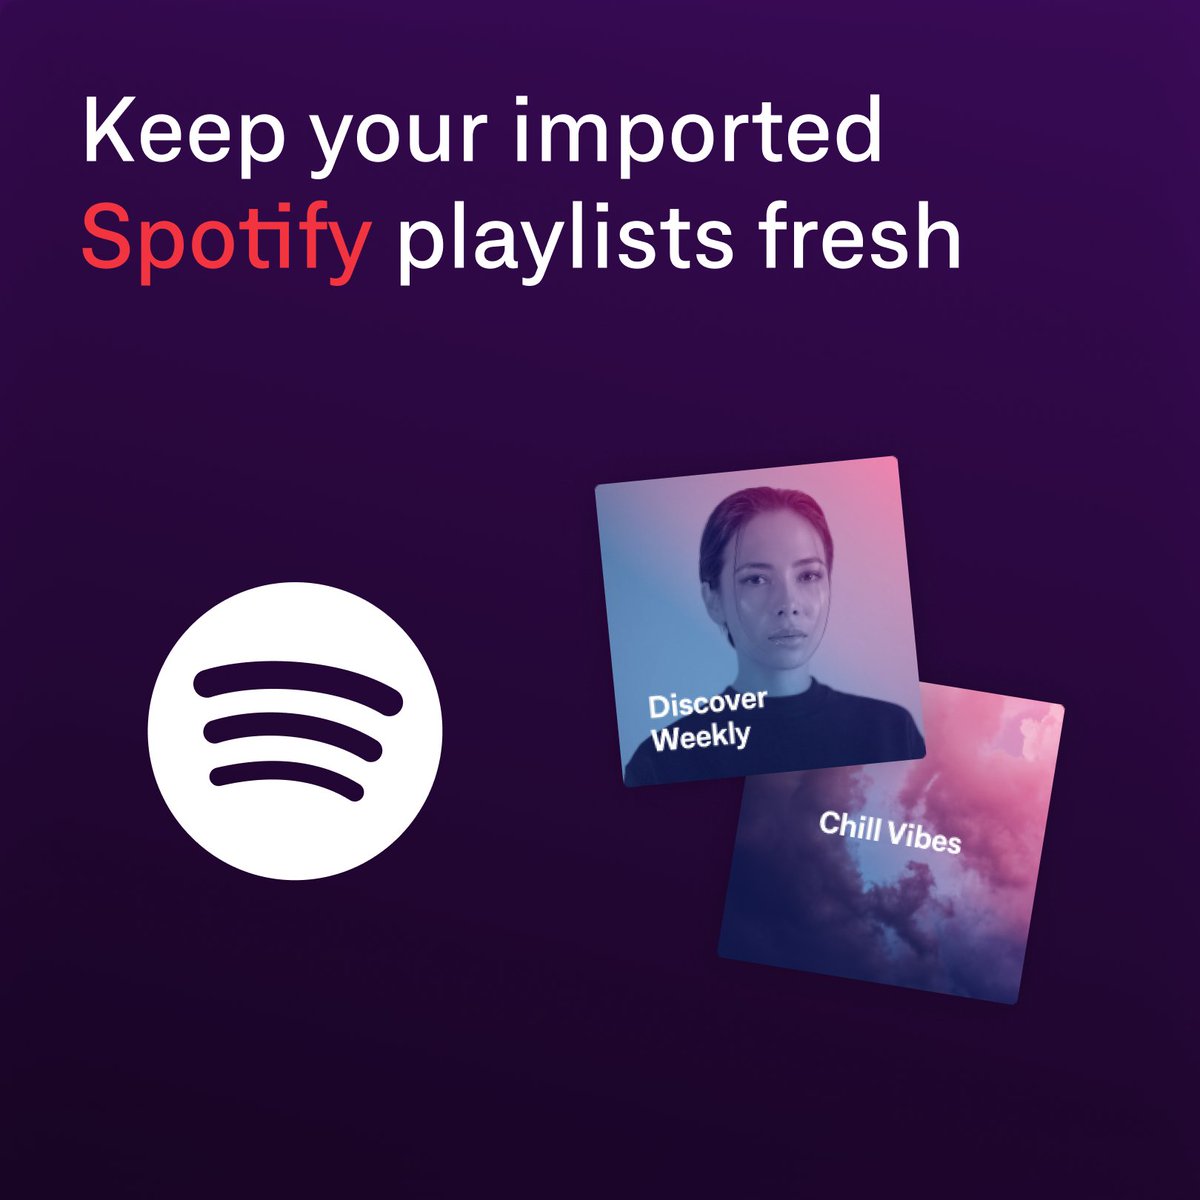 As if it wasn’t easy enough to make your favorite playlist business legal, it is now even easier to keep them synced! 🎵 Keep them fresh with these steps: 1. Select the playlist you’ve imported from Spotify. 2. Press sync to refresh - updating with the songs you’ve added.